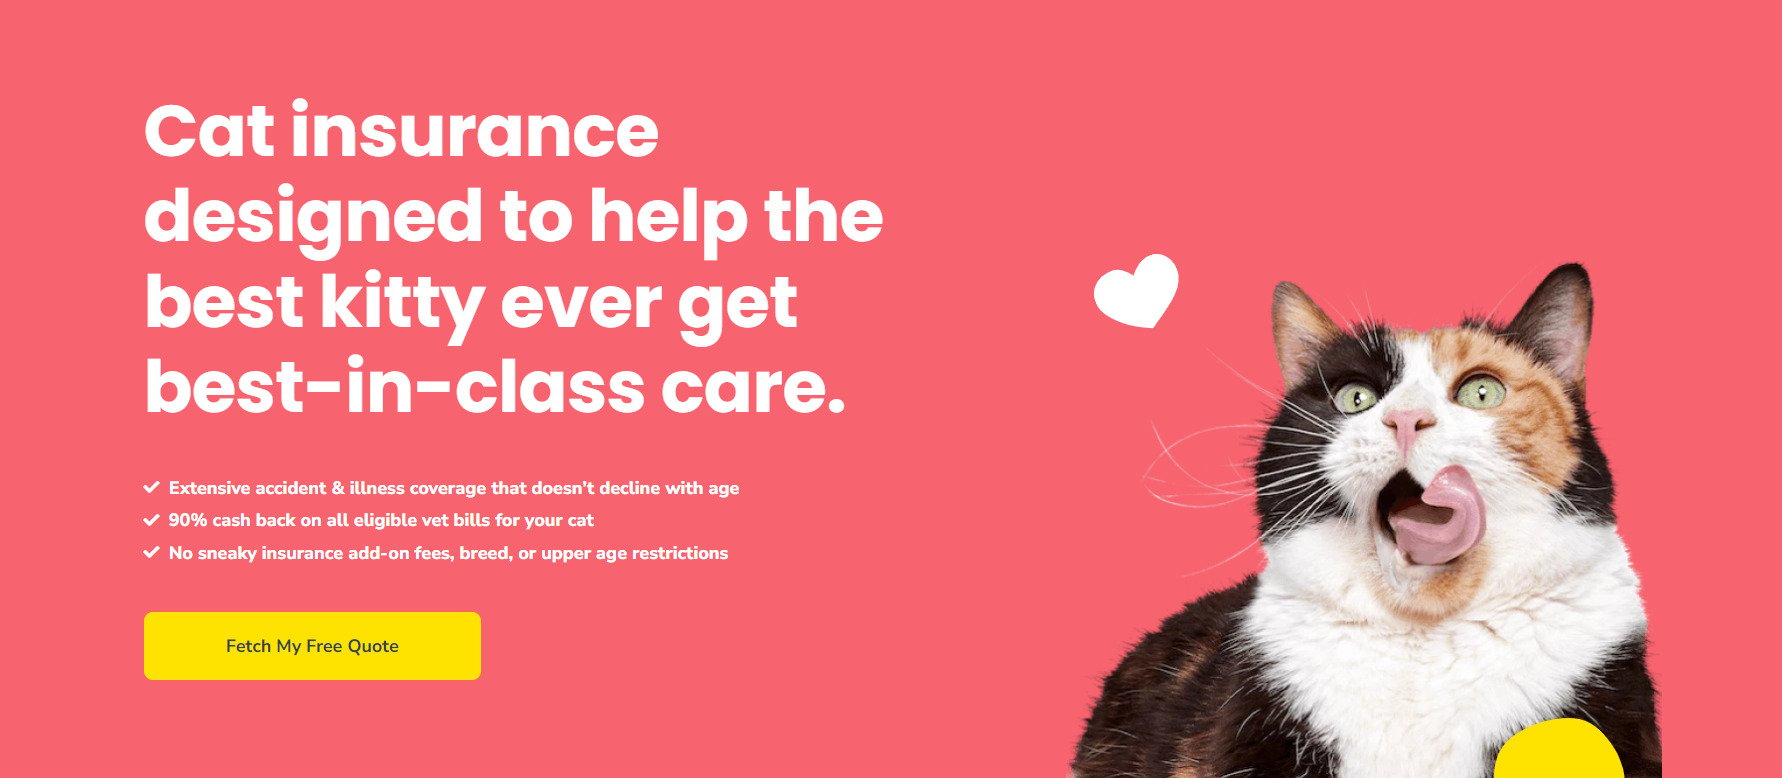 Ad from Pumpkin Pet Insurance that features a Calico cat. It is accompanied with text saying "Cat insurance designed to help the best kitty ever get best-in-class care." This ad promotes the idea that Pumpkin Pet Insurance doesn't discriminate against different cat breeds. 